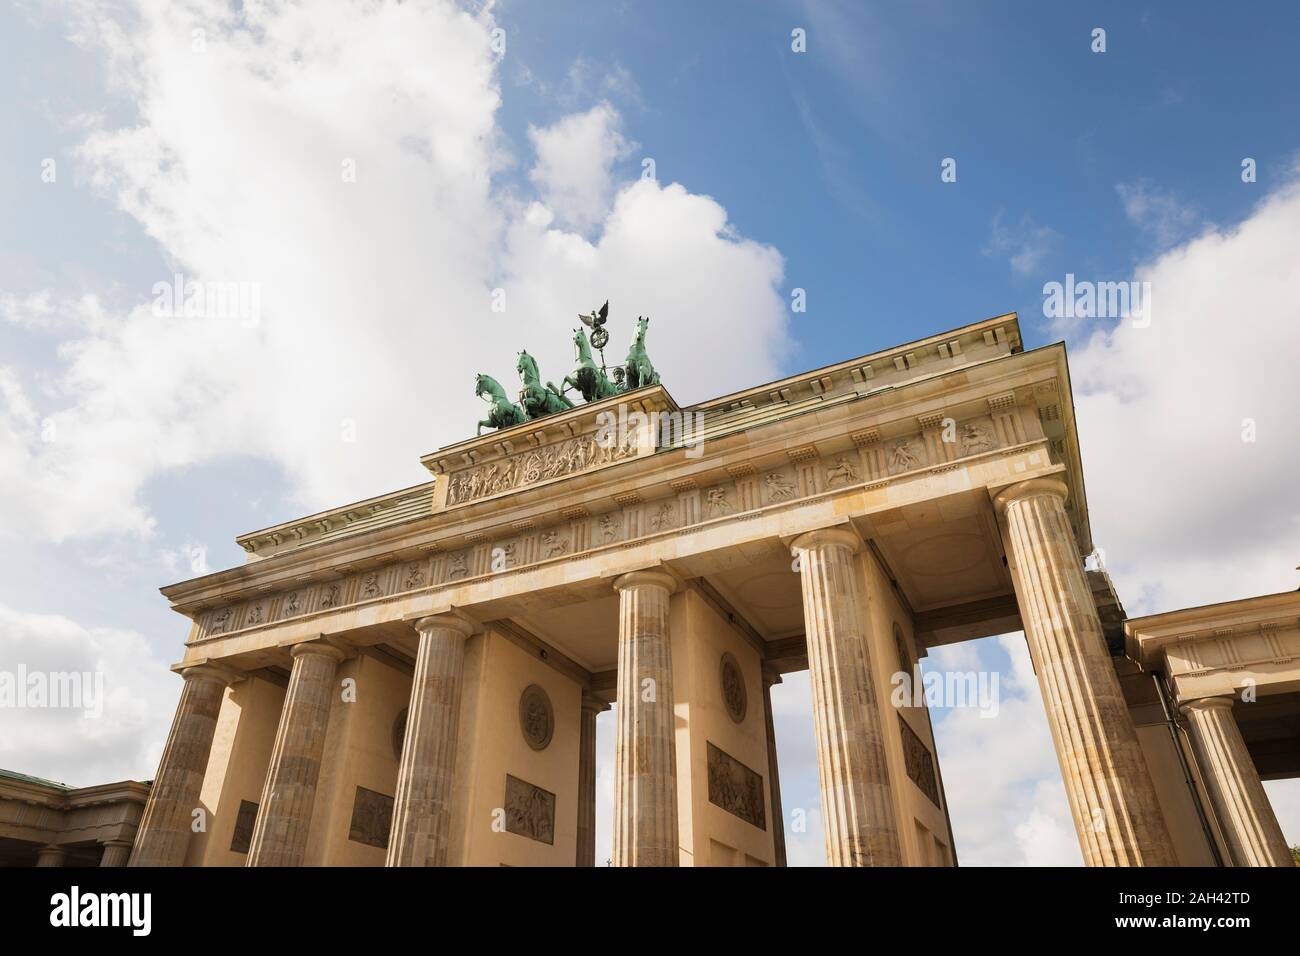 Germany, Berlin, Low angle view of Brandenburg Gate standing against clouds Stock Photo